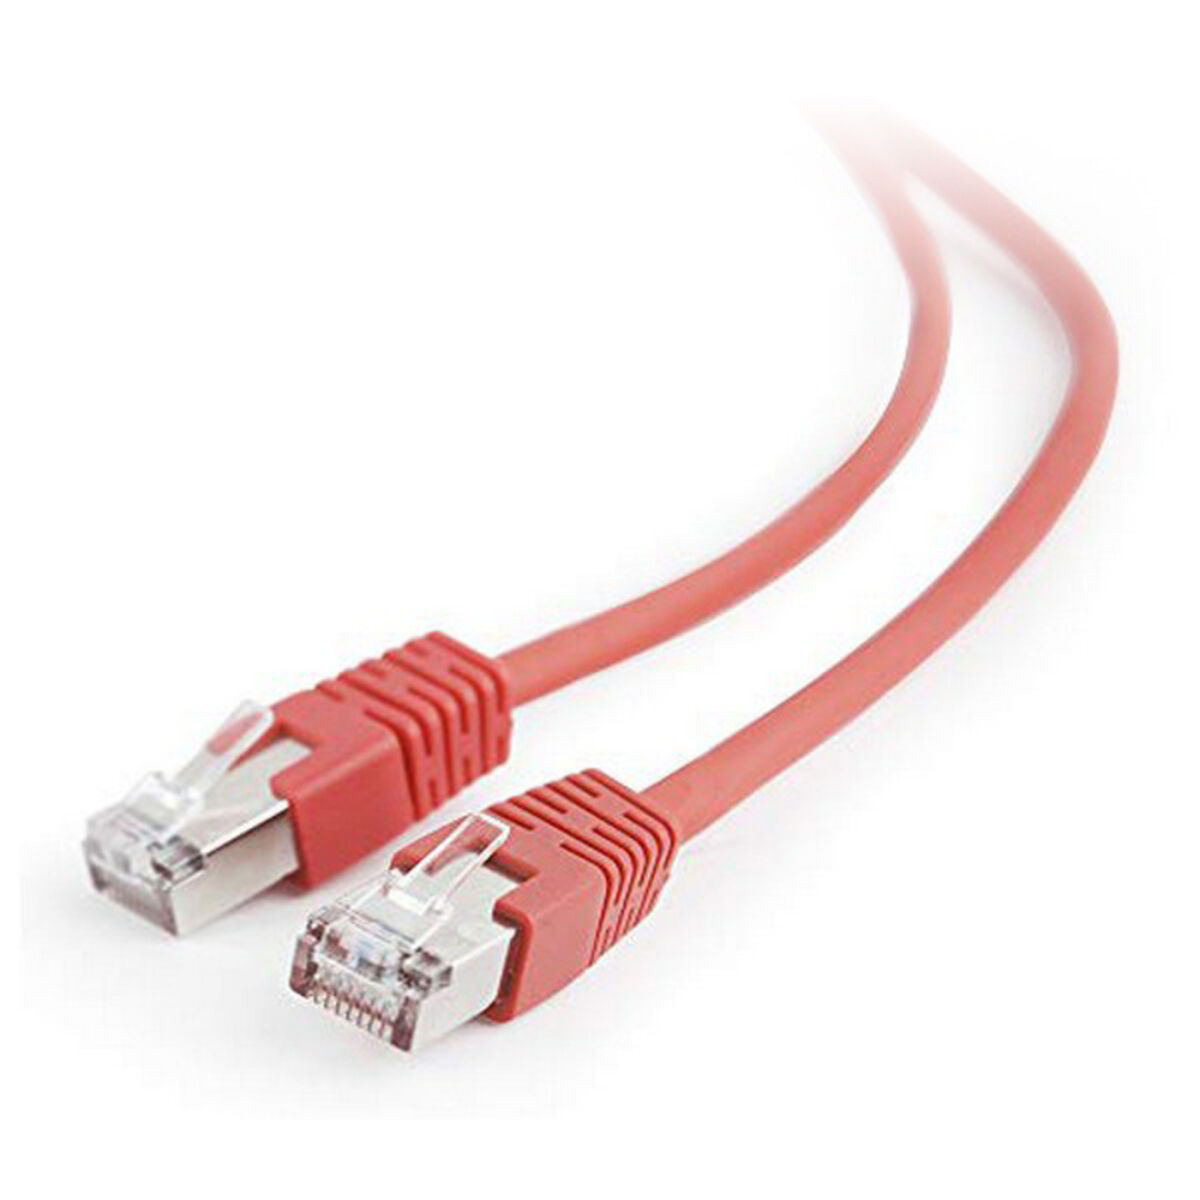 FTP Category 5e Rigid Network Cable GEMBIRD PP22-2M (Ø 6 mm)